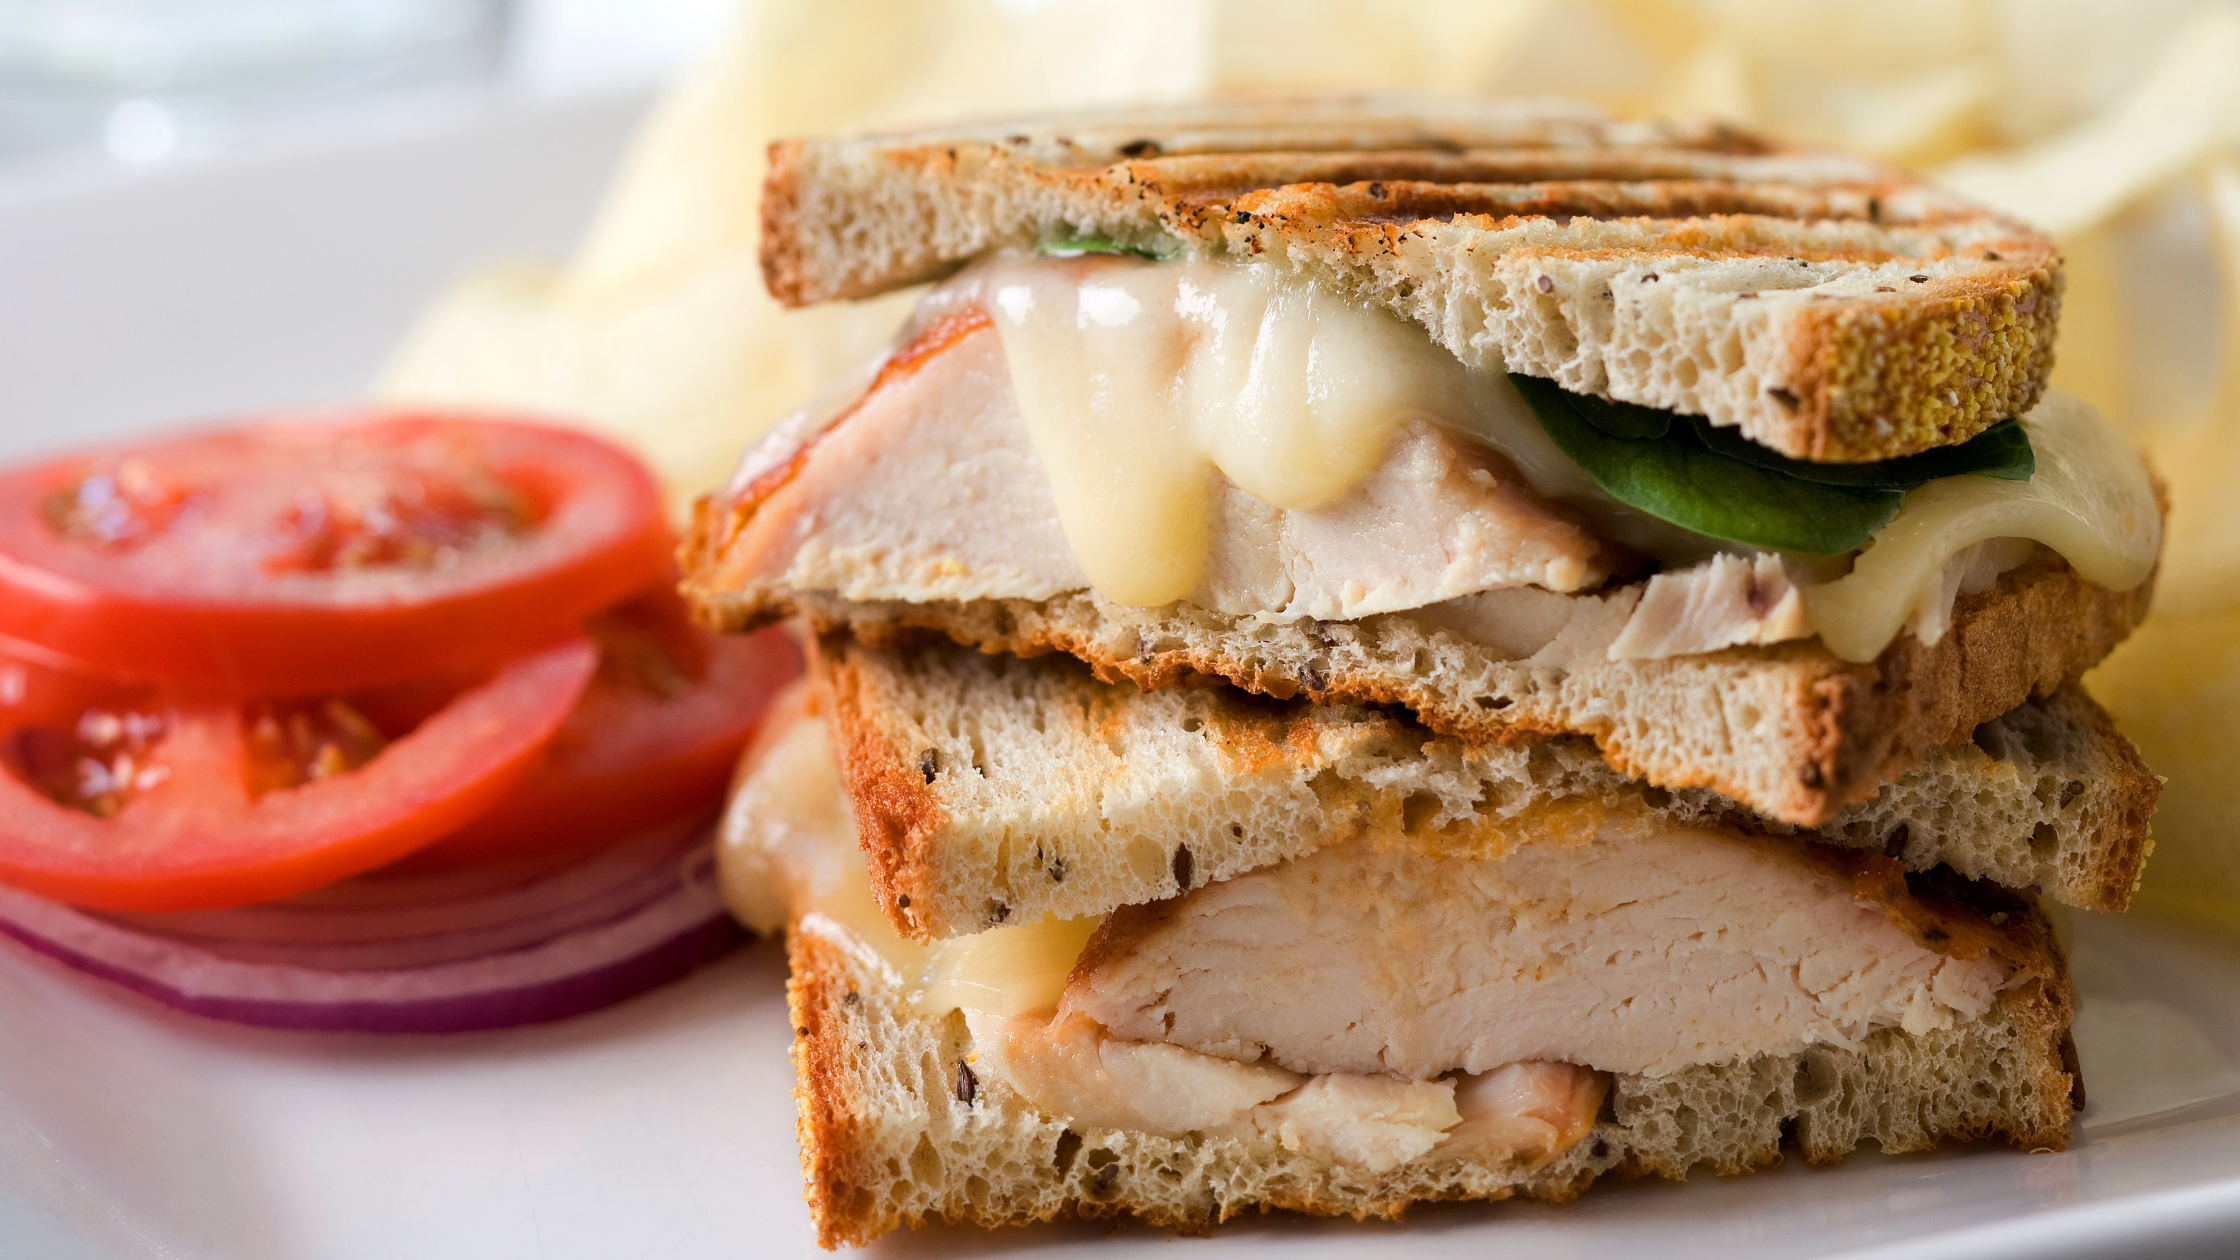 Flavorful Grilled Chicken & Brie Panini 15